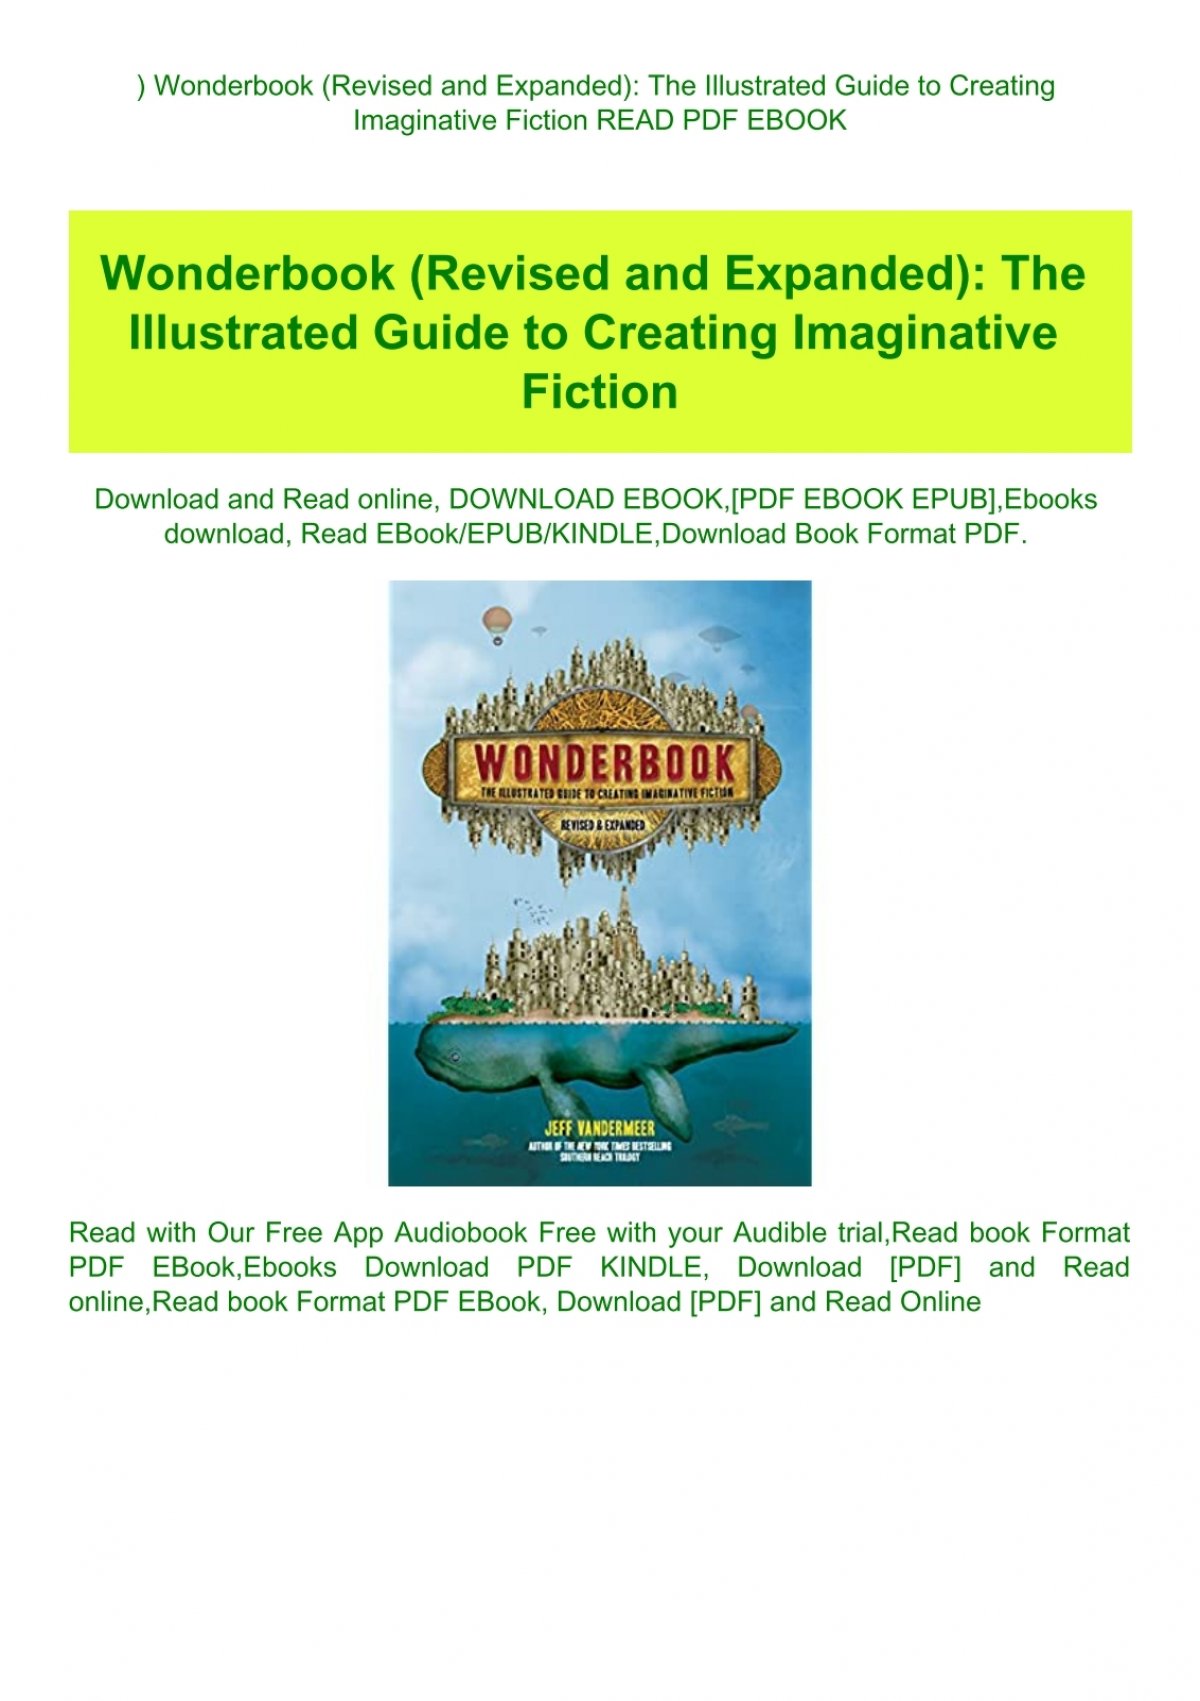 wonderbook the illustrated guide to creating imaginative fiction pdf download